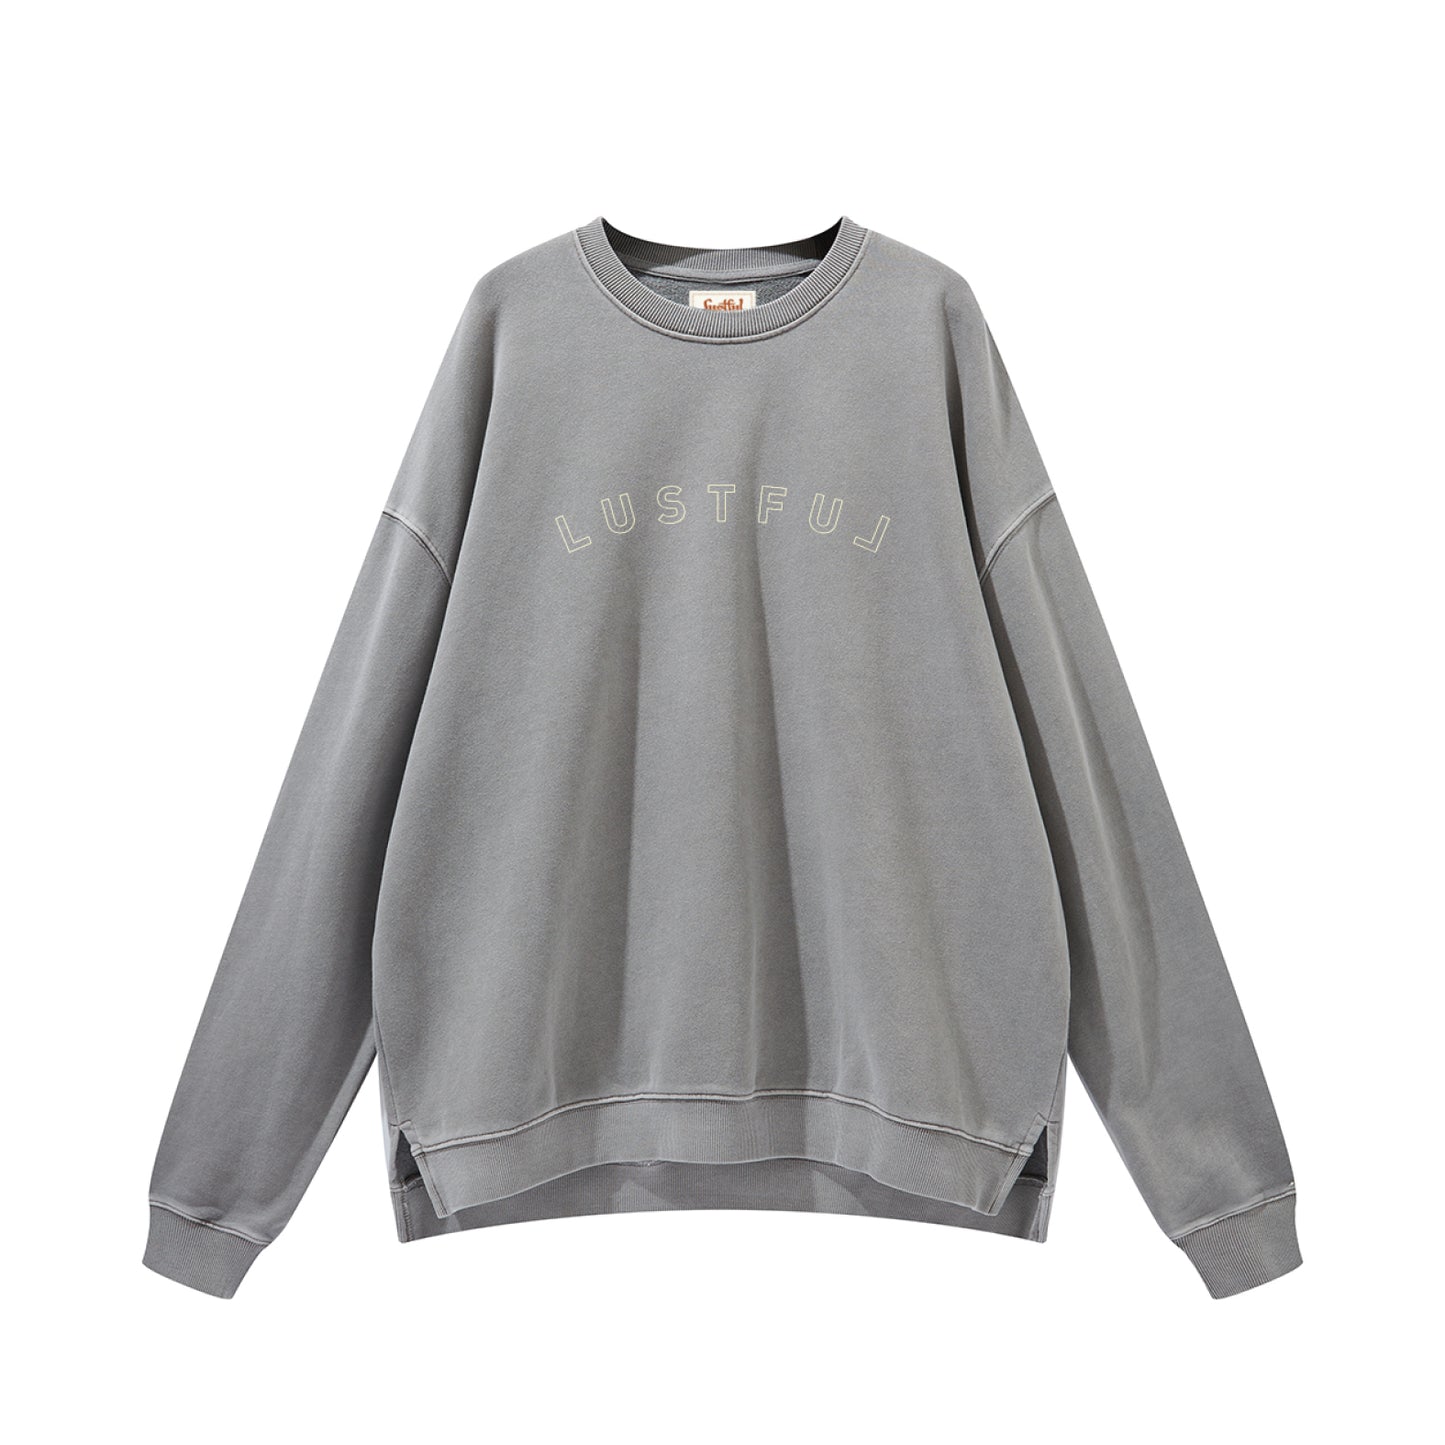 90's crewneck in washed grey